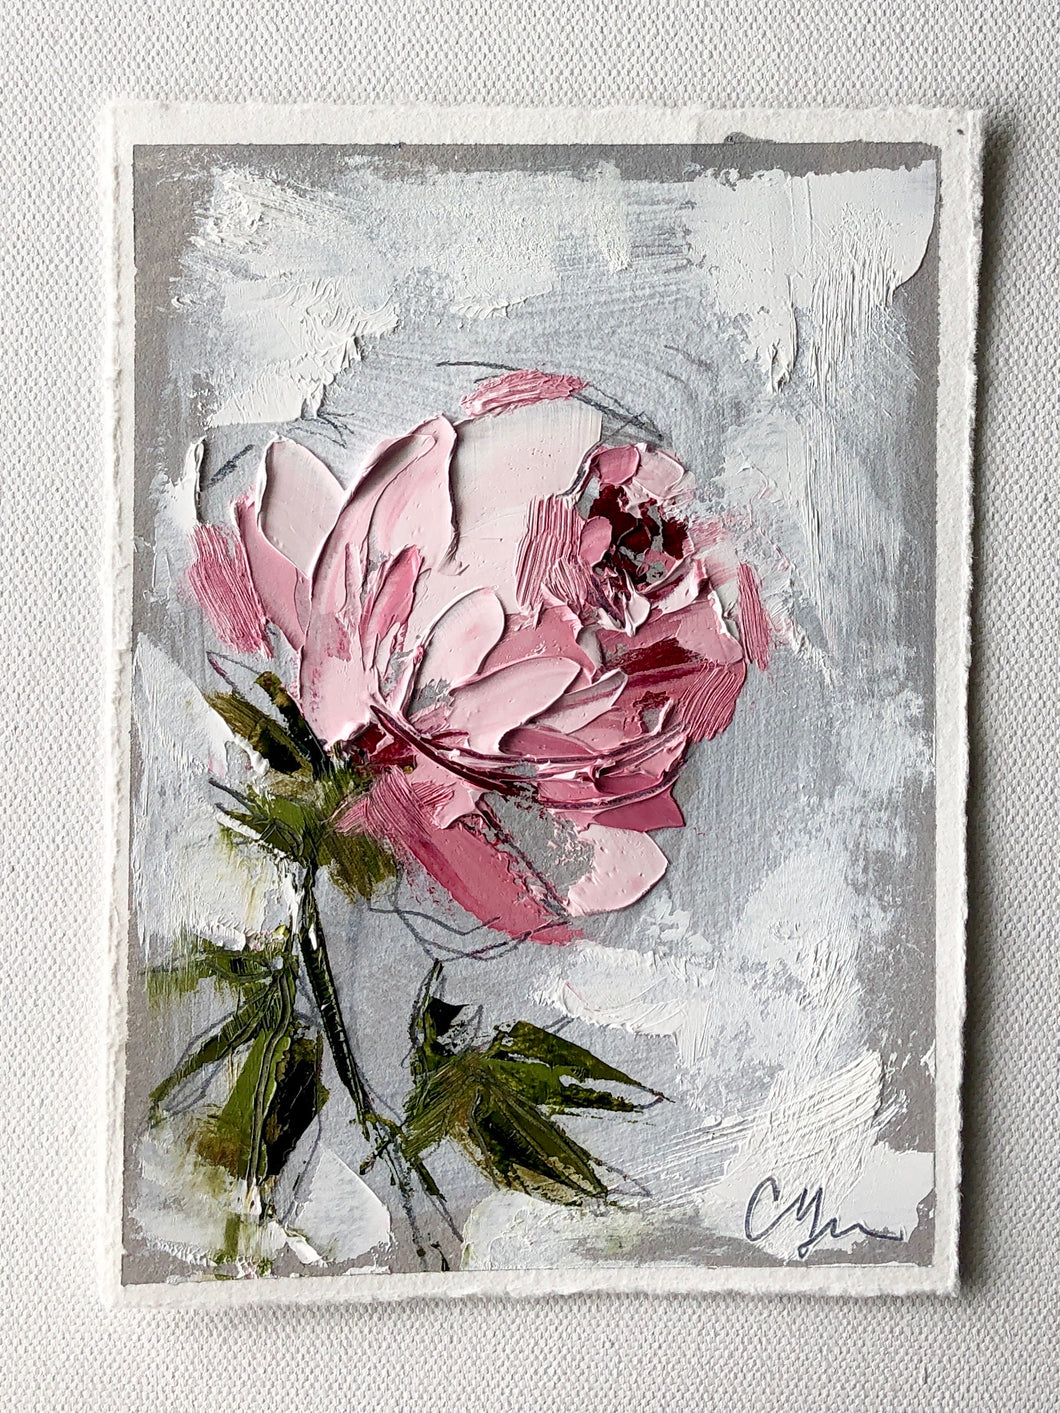 “Pink on Grey II” 7x5” Oil/Graphite on Paper